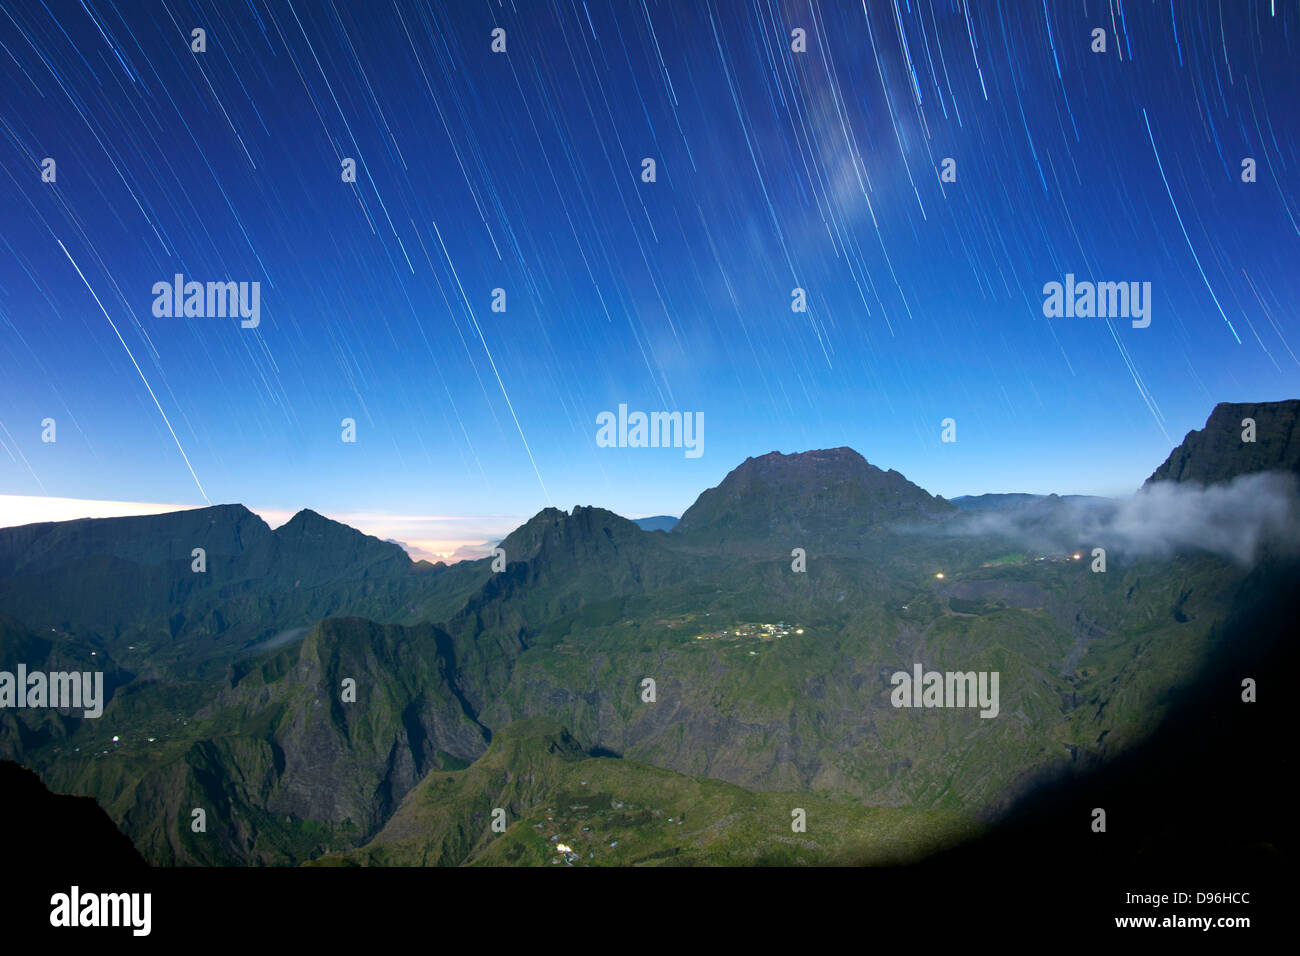 Star trails over the Cirque de Mafate caldera on the French island of Reunion in the Indian Ocean. Stock Photo